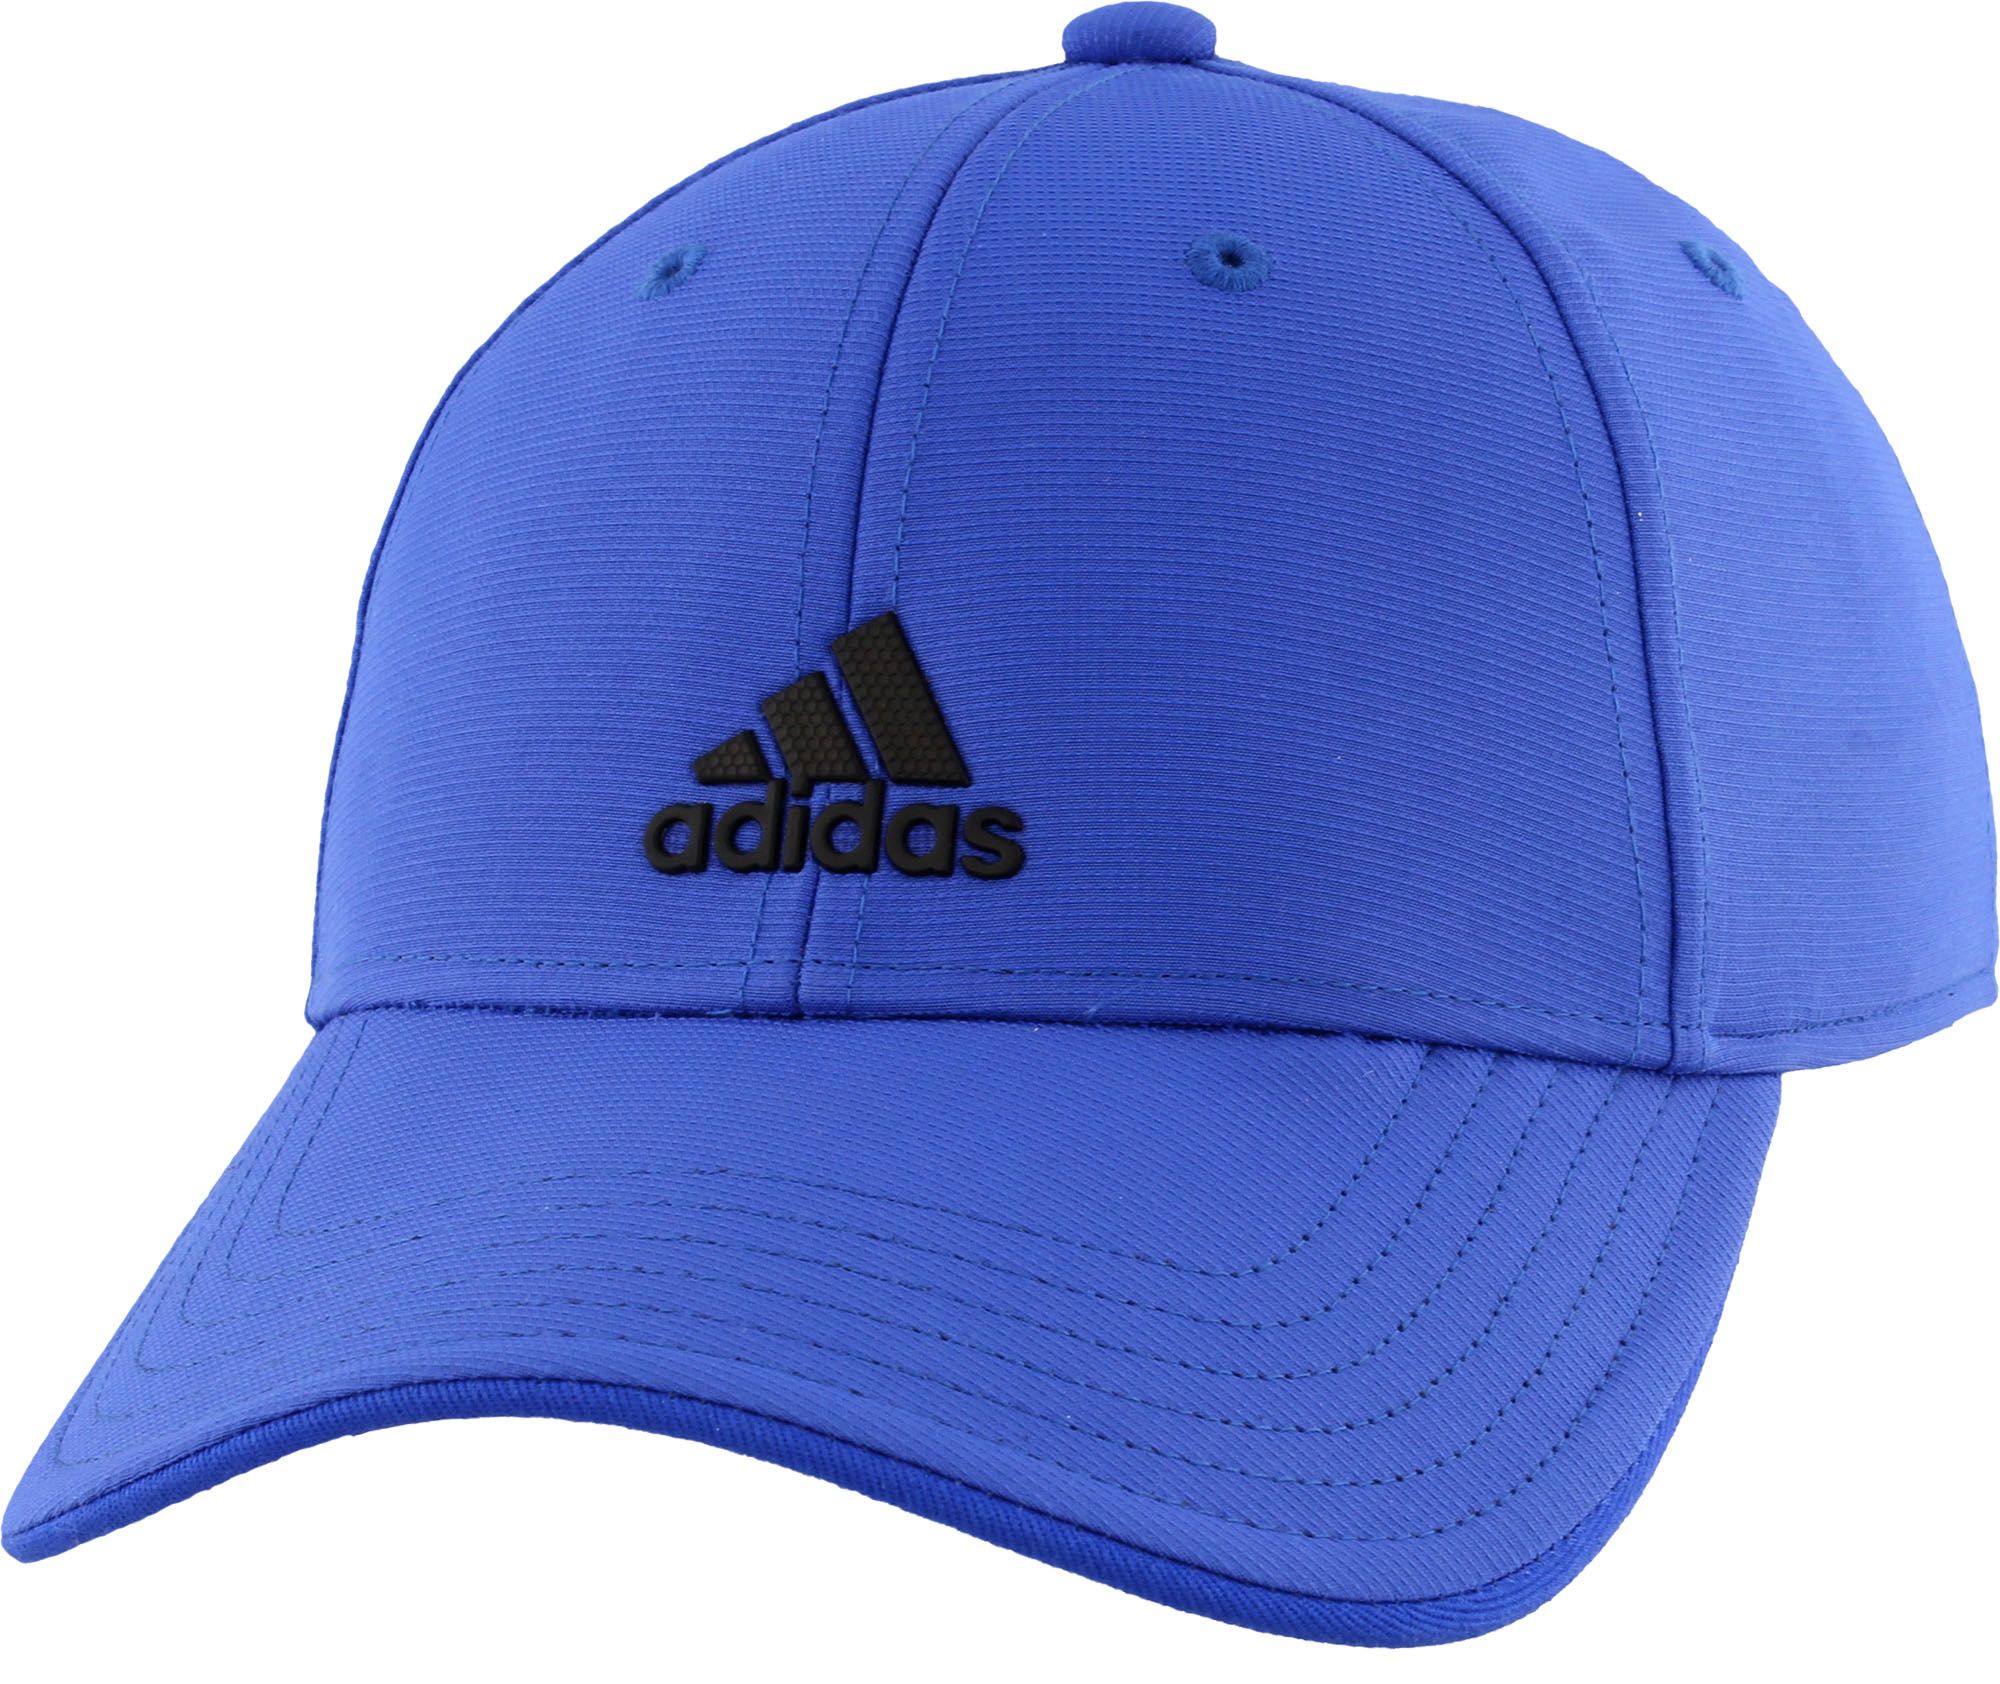 adidas hats for kids